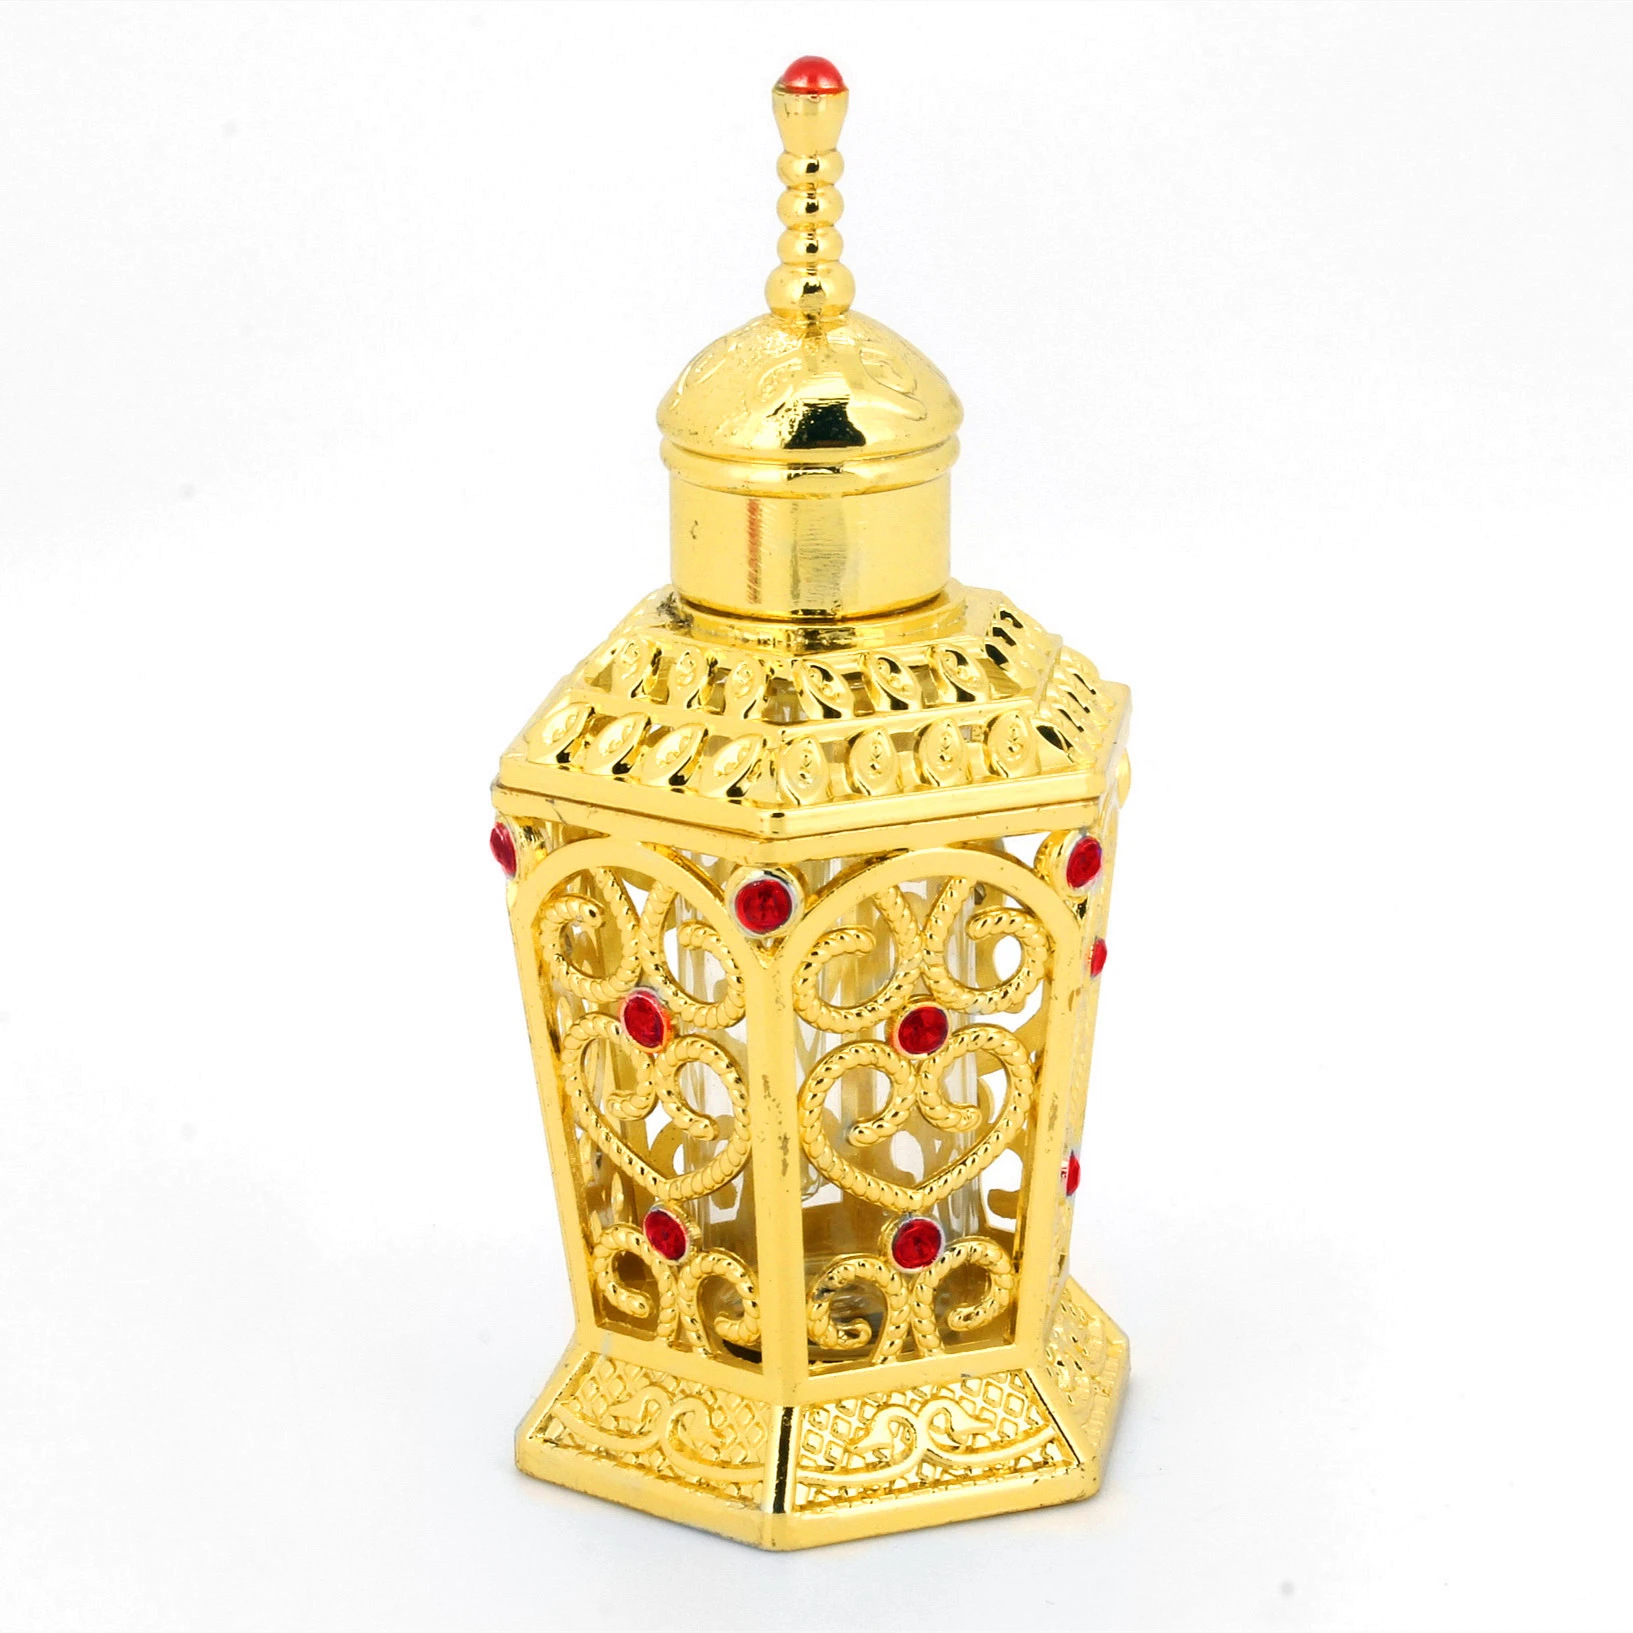 10ml Old Fashioned Golden / Rose Golden Plated Zamac Perfume Bottle with Glass Rod Lid 8 colors Available